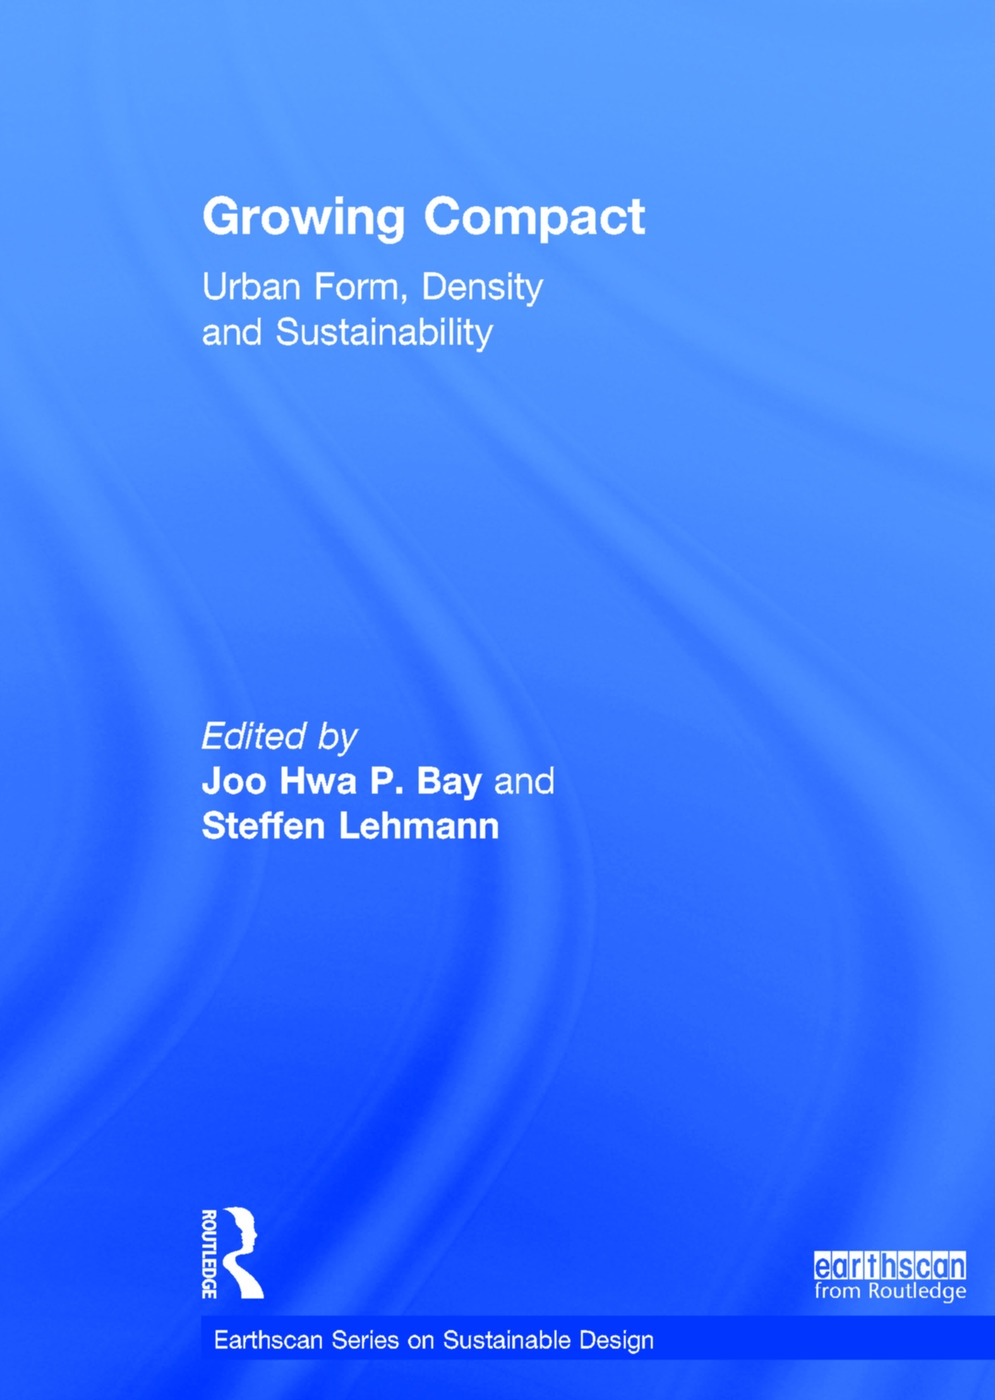 Growing Compact: Urban Form, Density and Sustainability